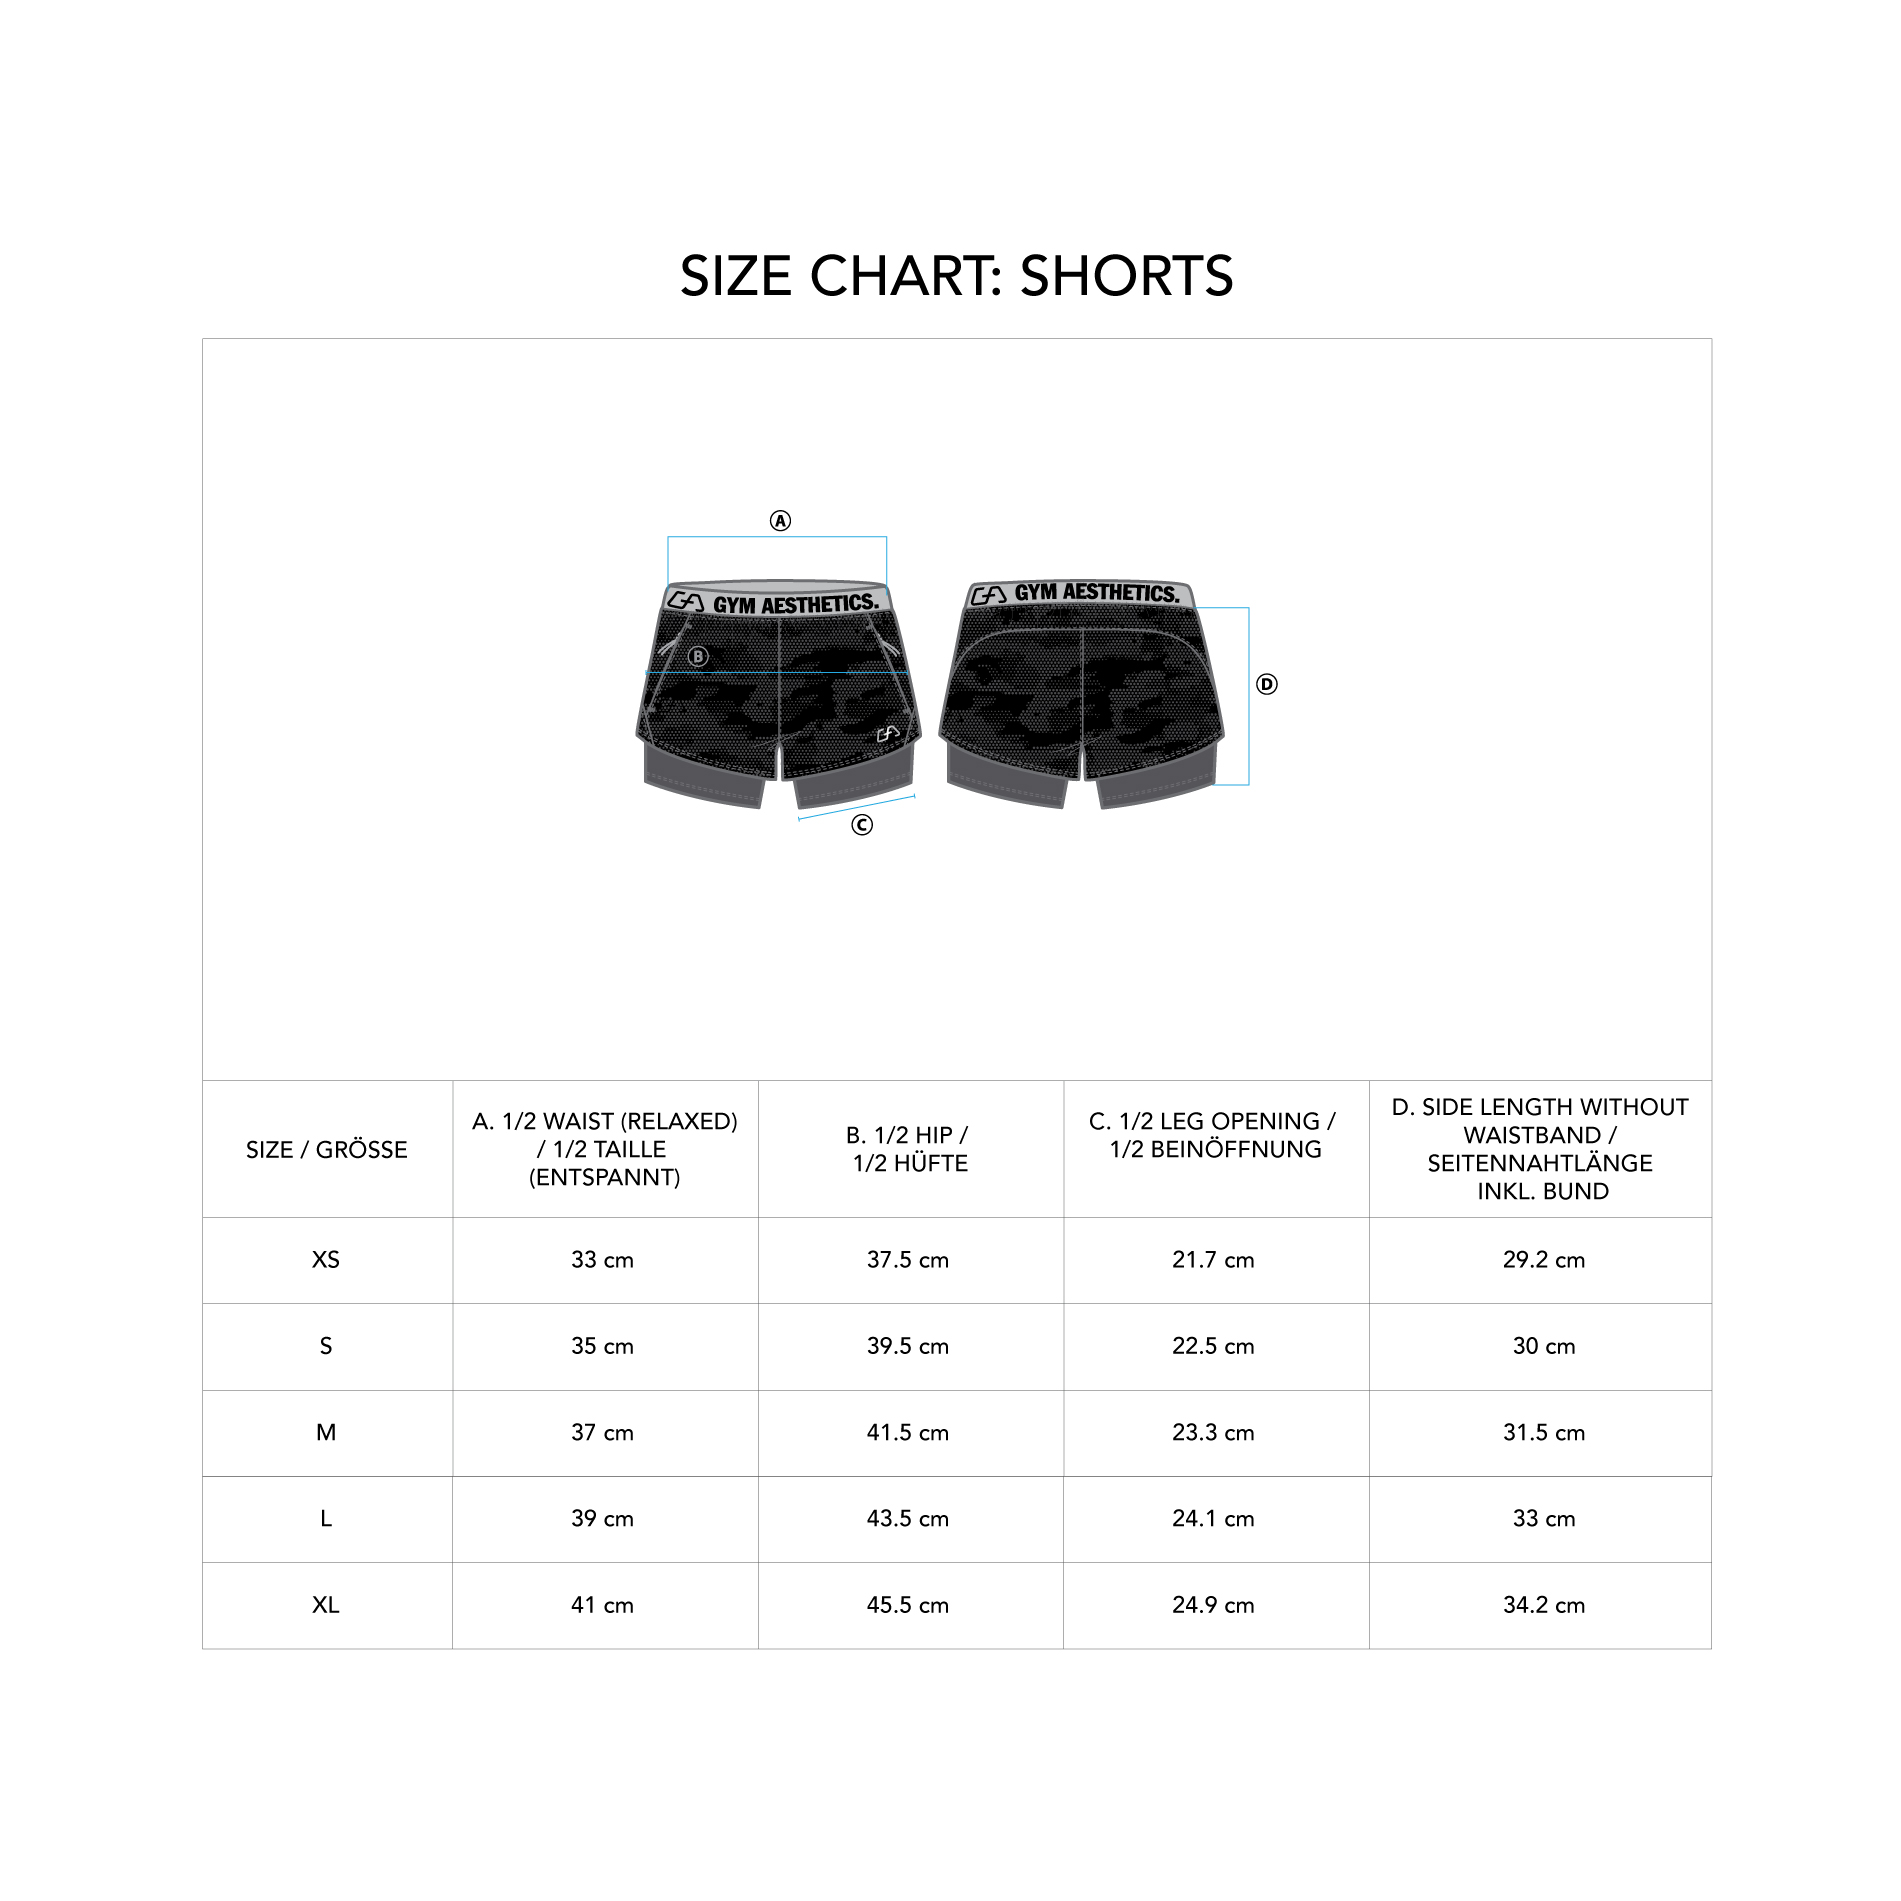 Running Ladies 2 in 1 Thigh Length Shorts - size chart